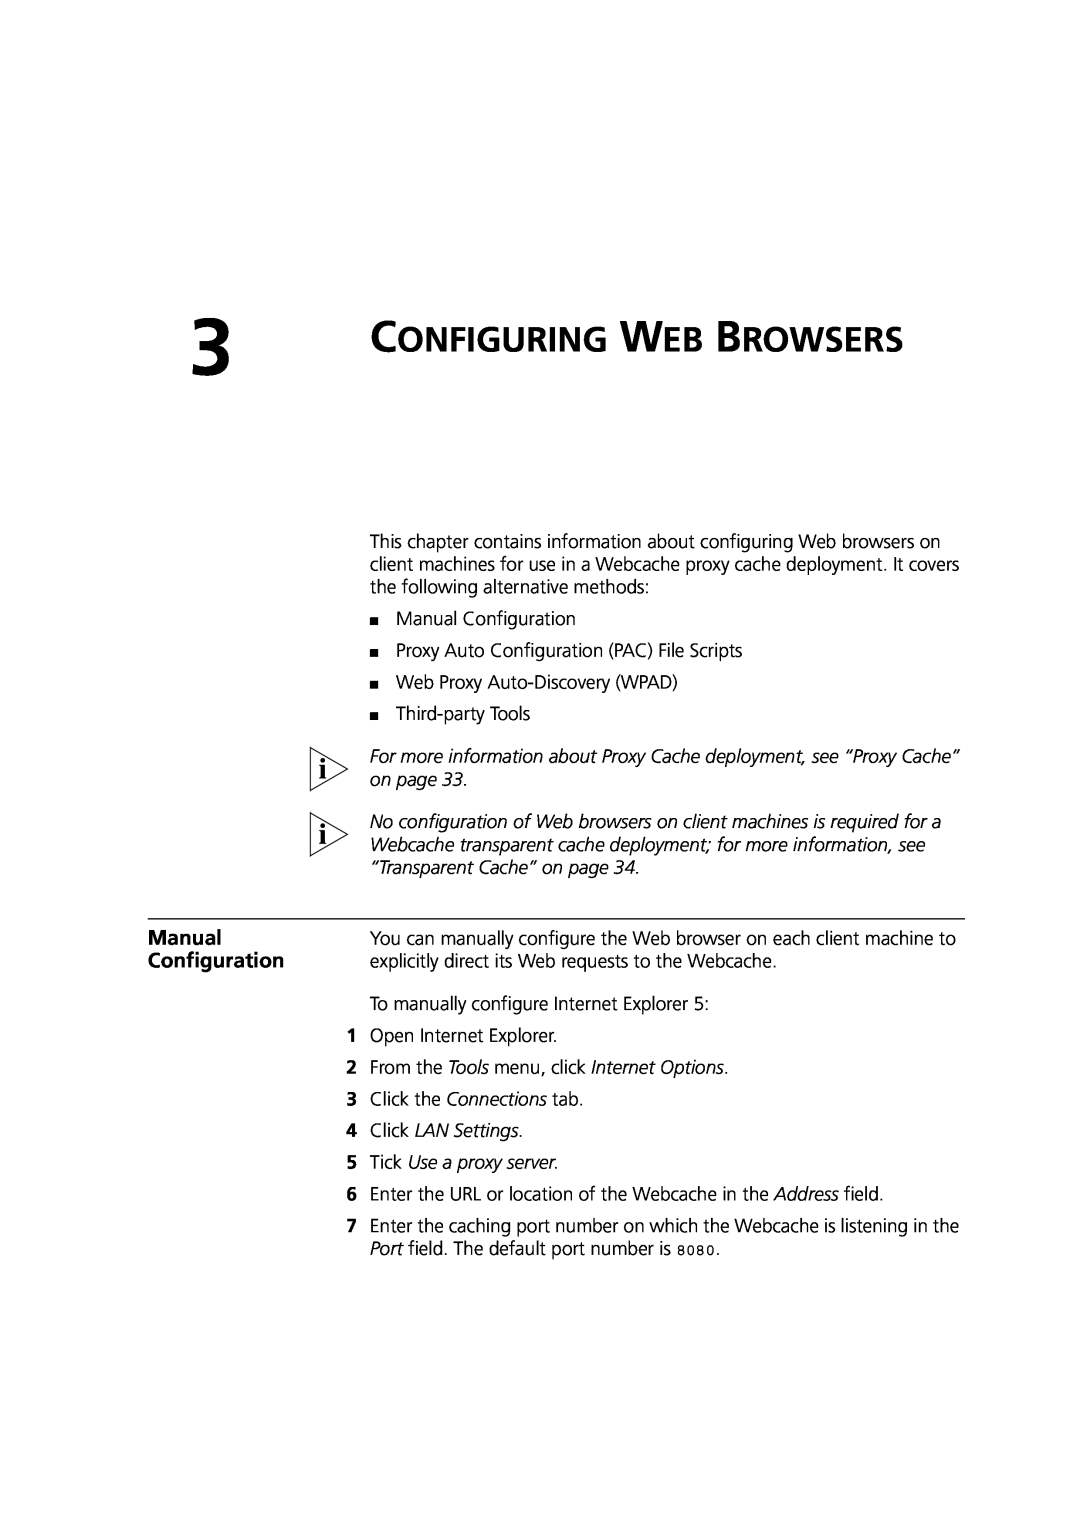 3Com Webcache 3000 (3C16116) manual Configuring Web Browsers, Manual, explicitly direct its Web requests to the Webcache 